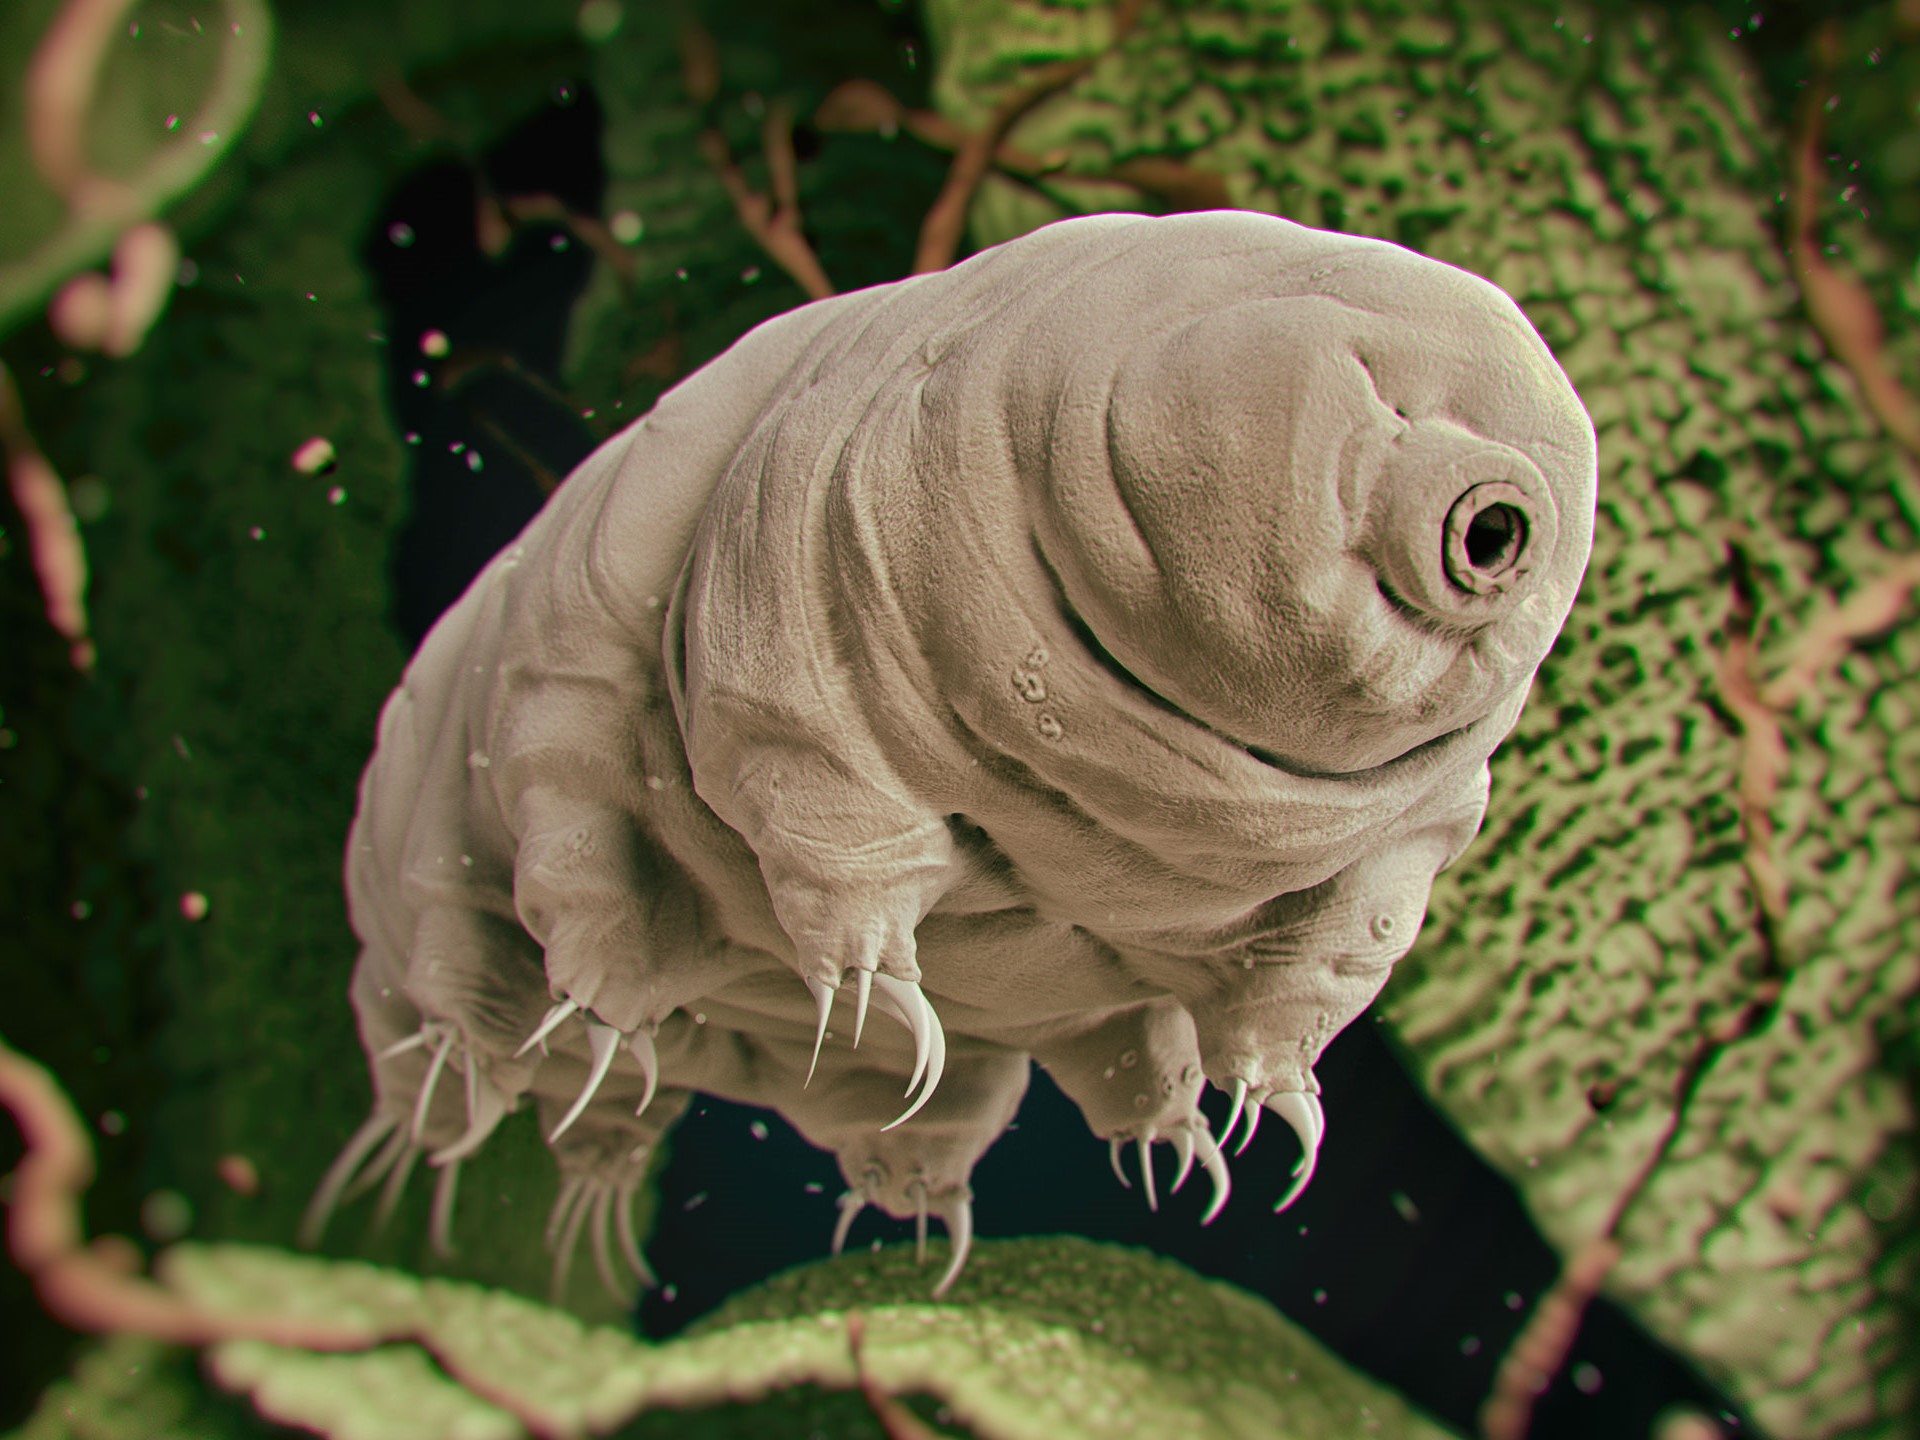 New Species of Water Bear Discovered in India - Key Biscayne Citizen  Scientist Project